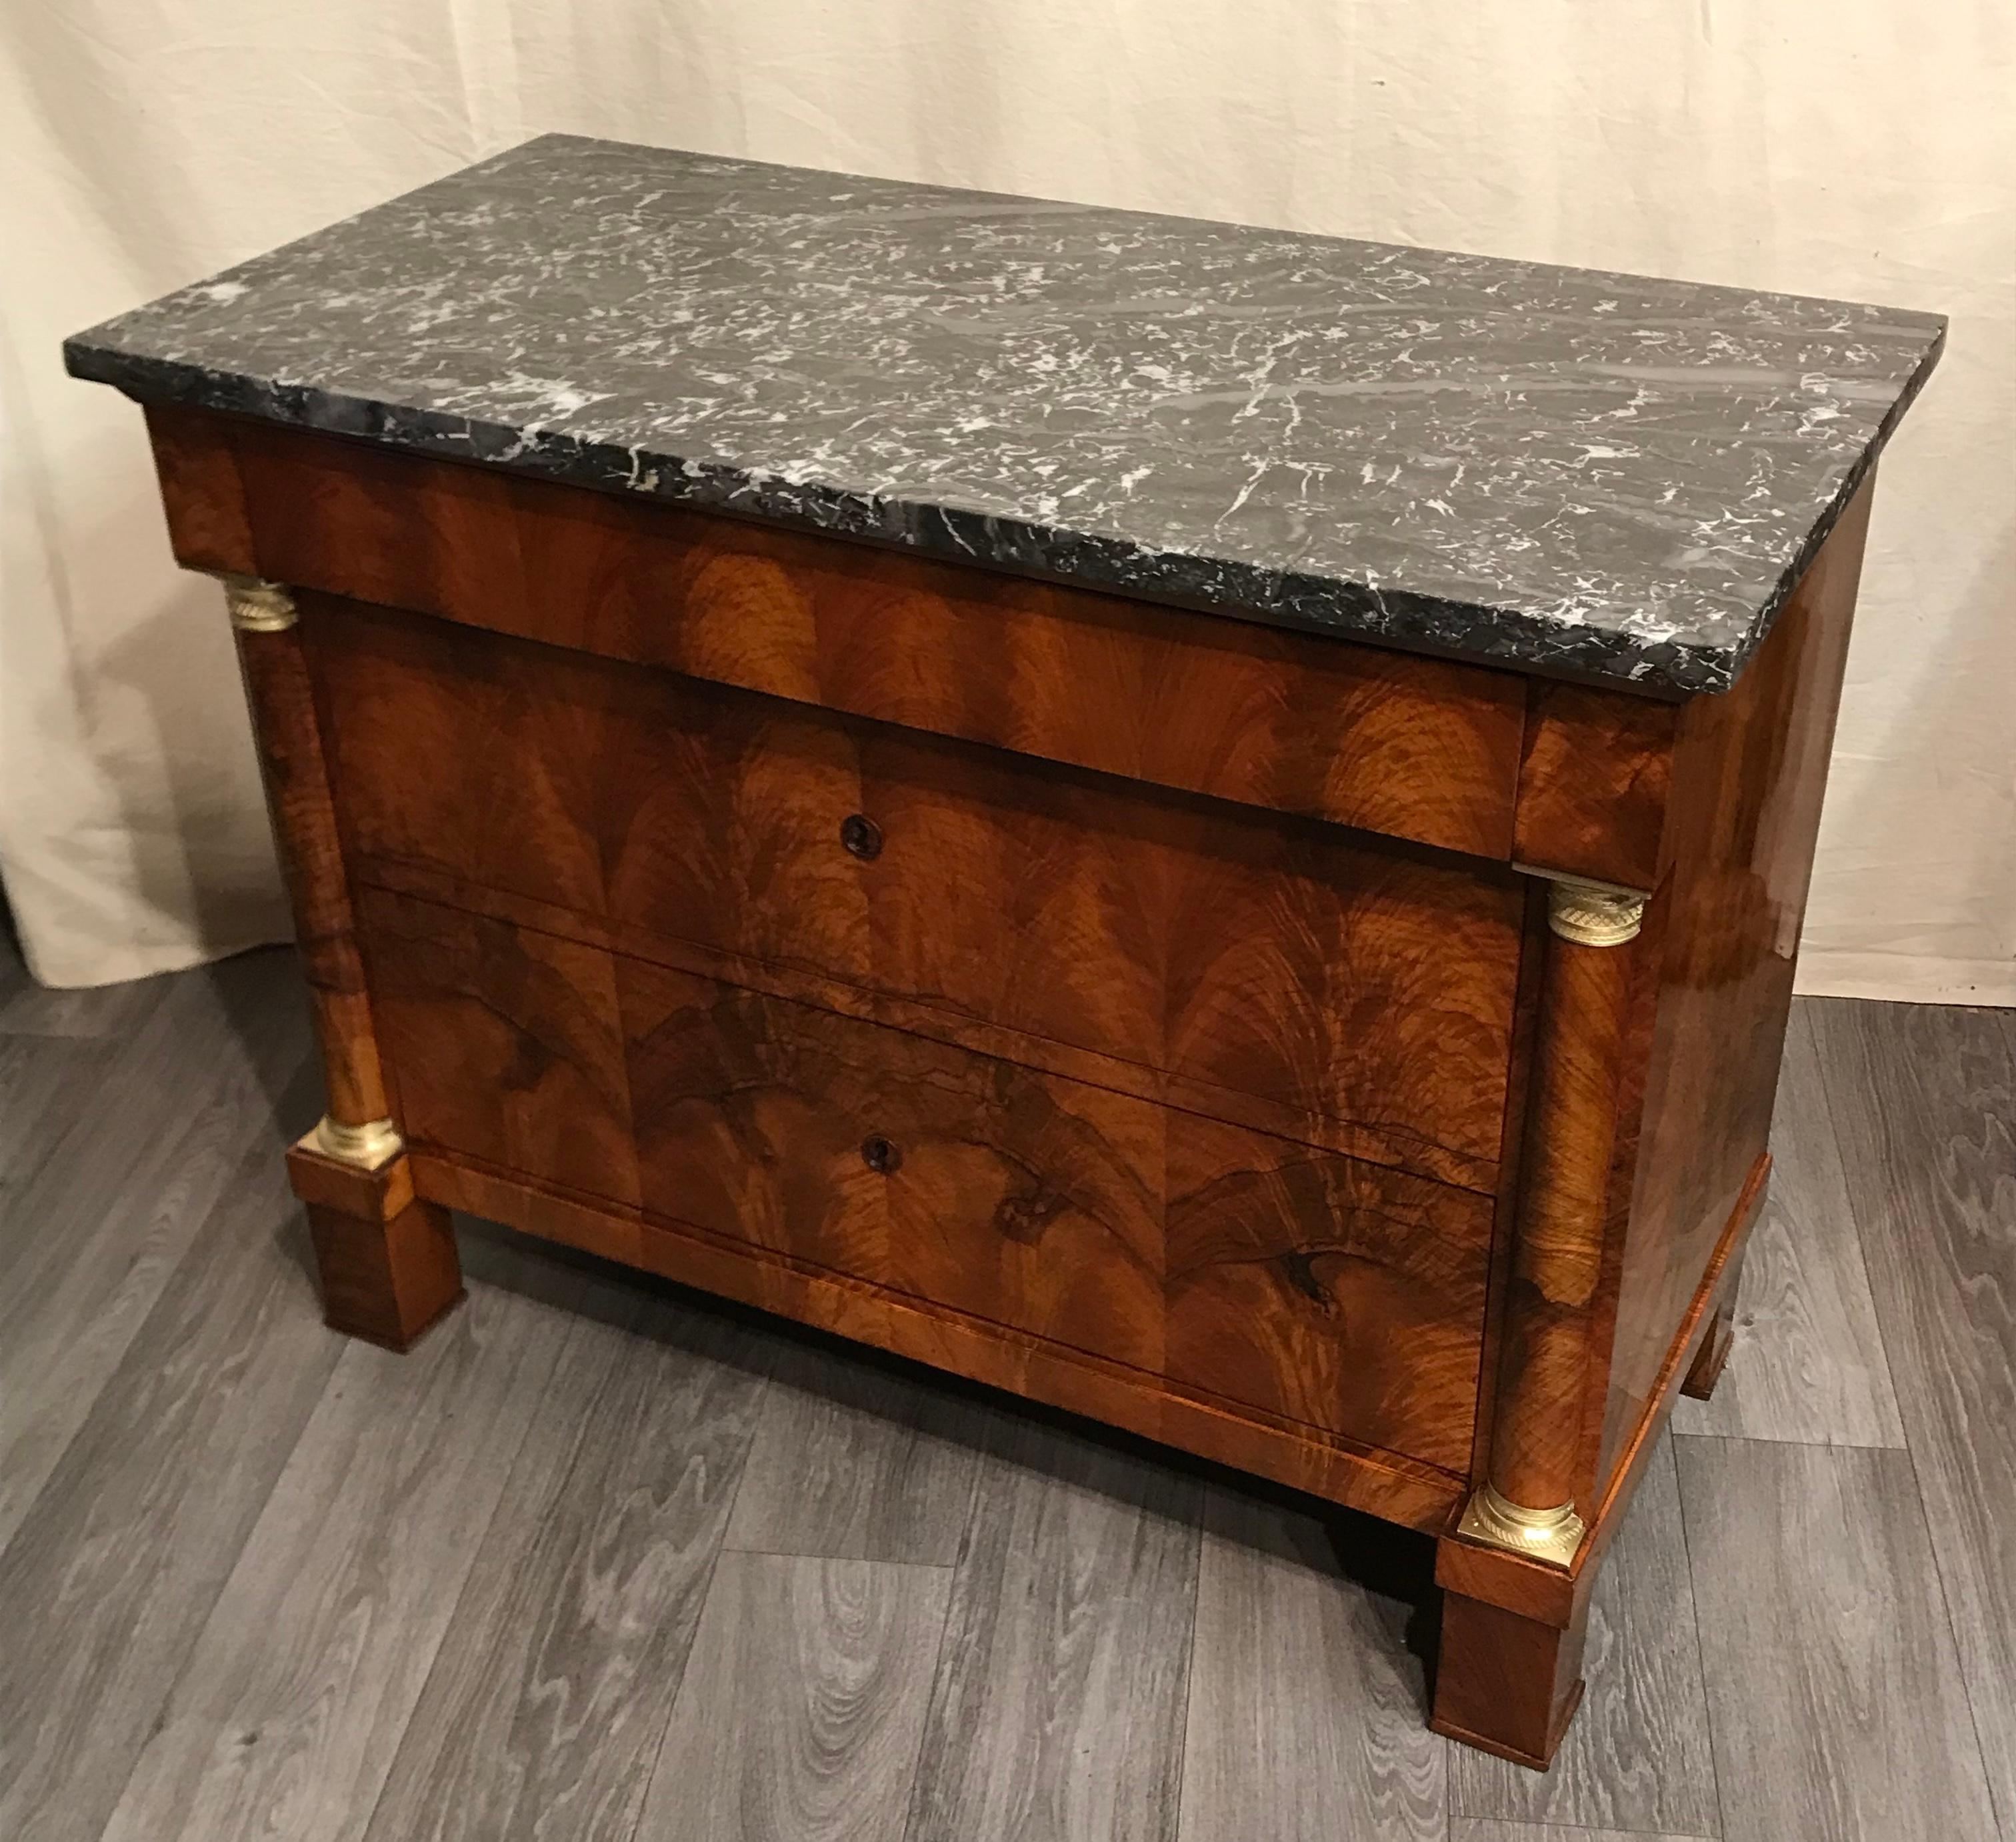 This elegant Empire chest of drawers comes from France and dates back to 1810. The three drawer commode has a very pretty walnut veneer and a marble top. The original ebonized wooden escutcheons do not distract from the beautiful veneer grain. The